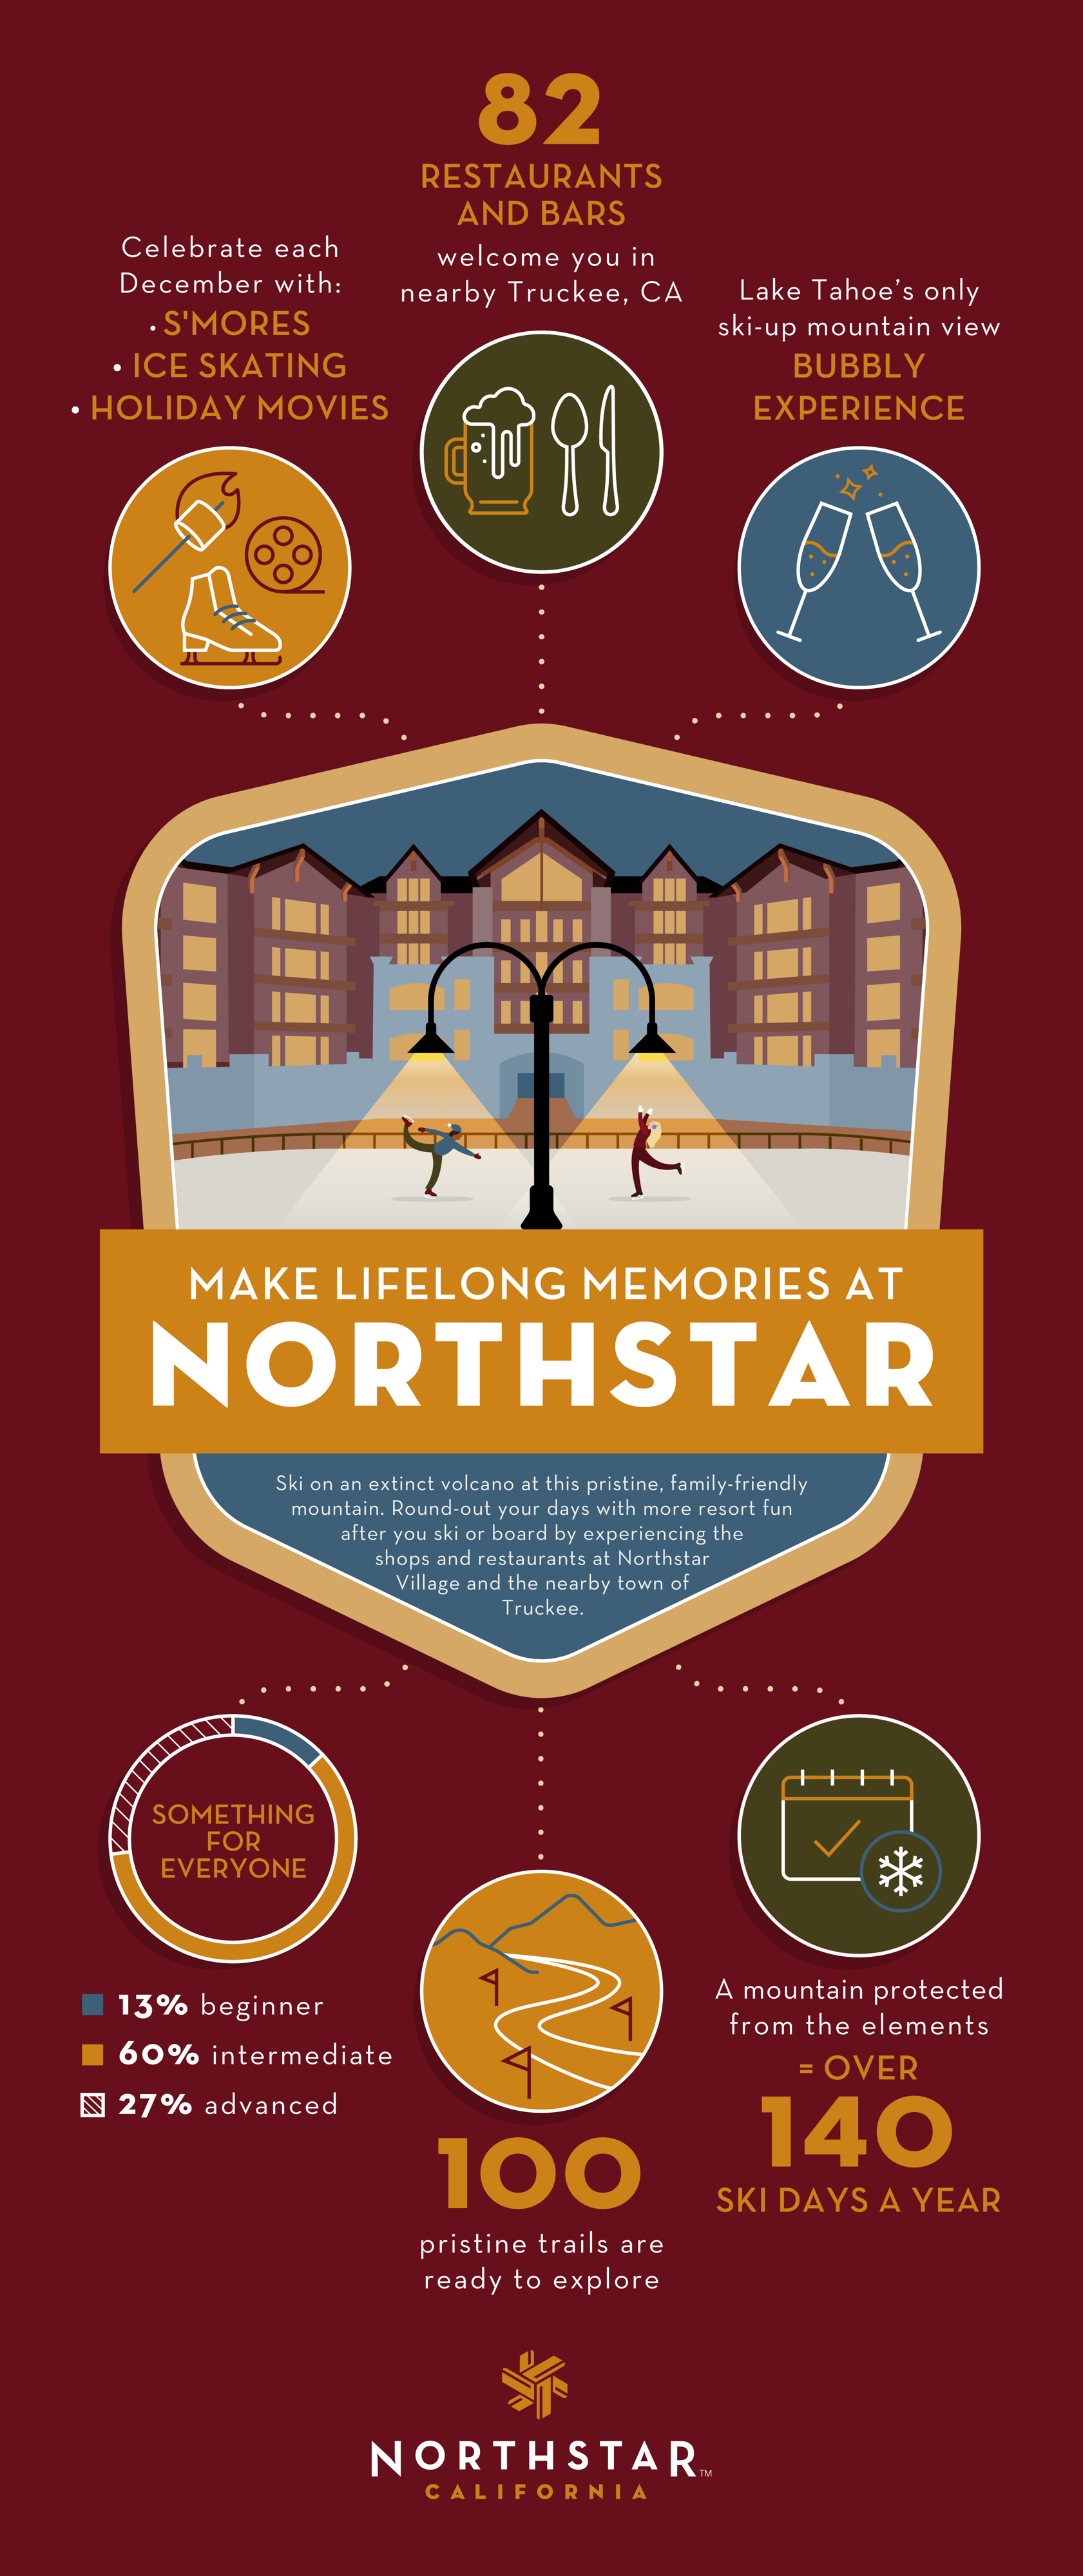 An infographic about Northstar Ski Resort with facts about the 82 restuarnts, terrain and the 100 trails.